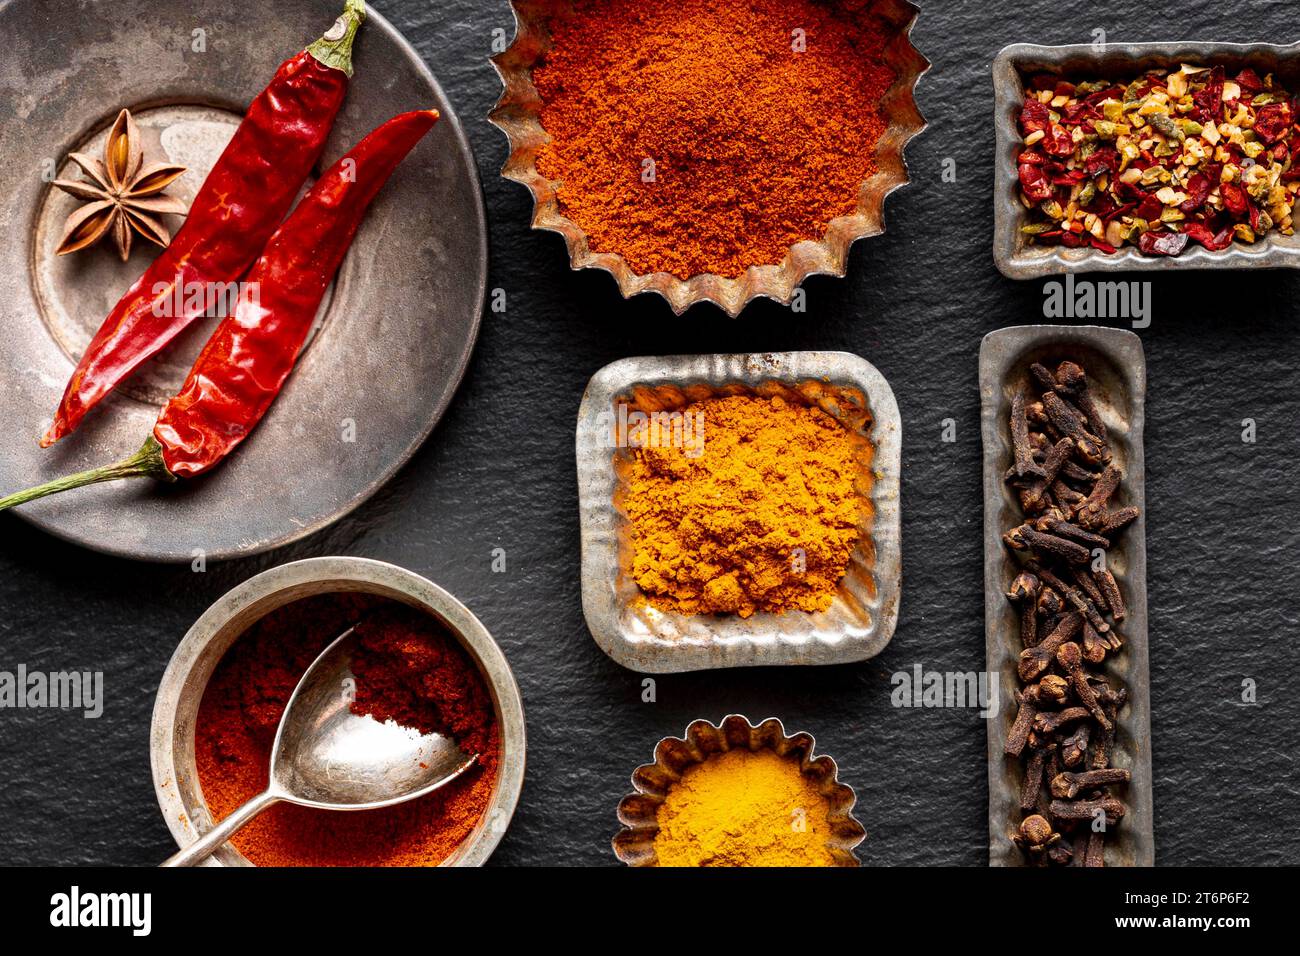 Assortment spices with clove chili peppers Stock Photo